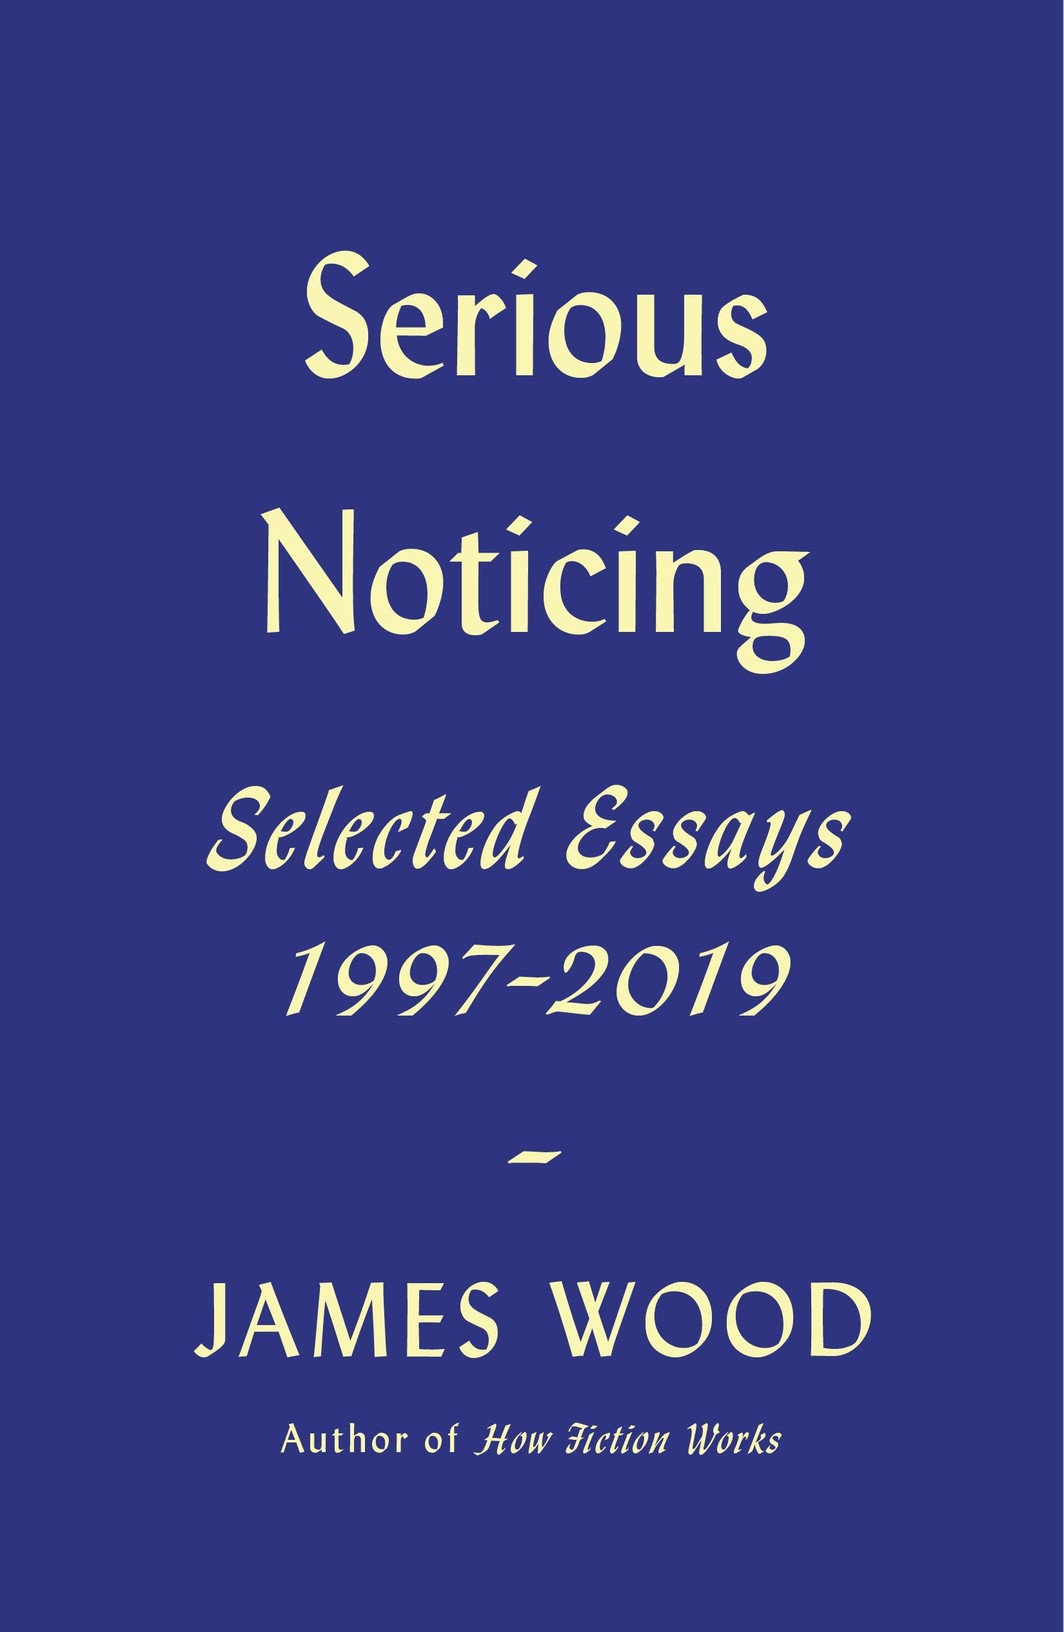 The cover of Serious Noticing: Selected Essays, 1997-2019